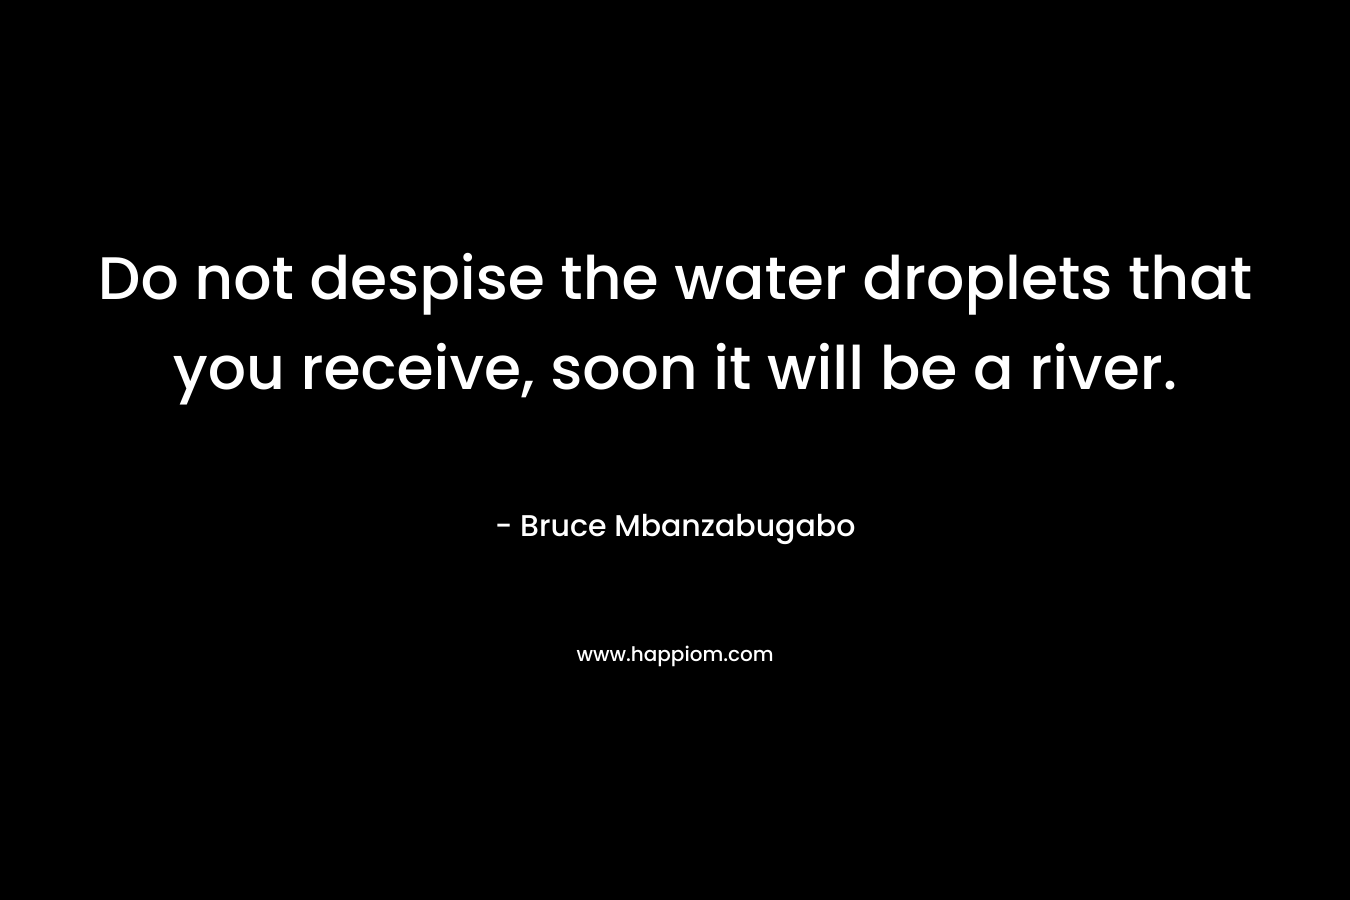 Do not despise the water droplets that you receive, soon it will be a river. – Bruce Mbanzabugabo